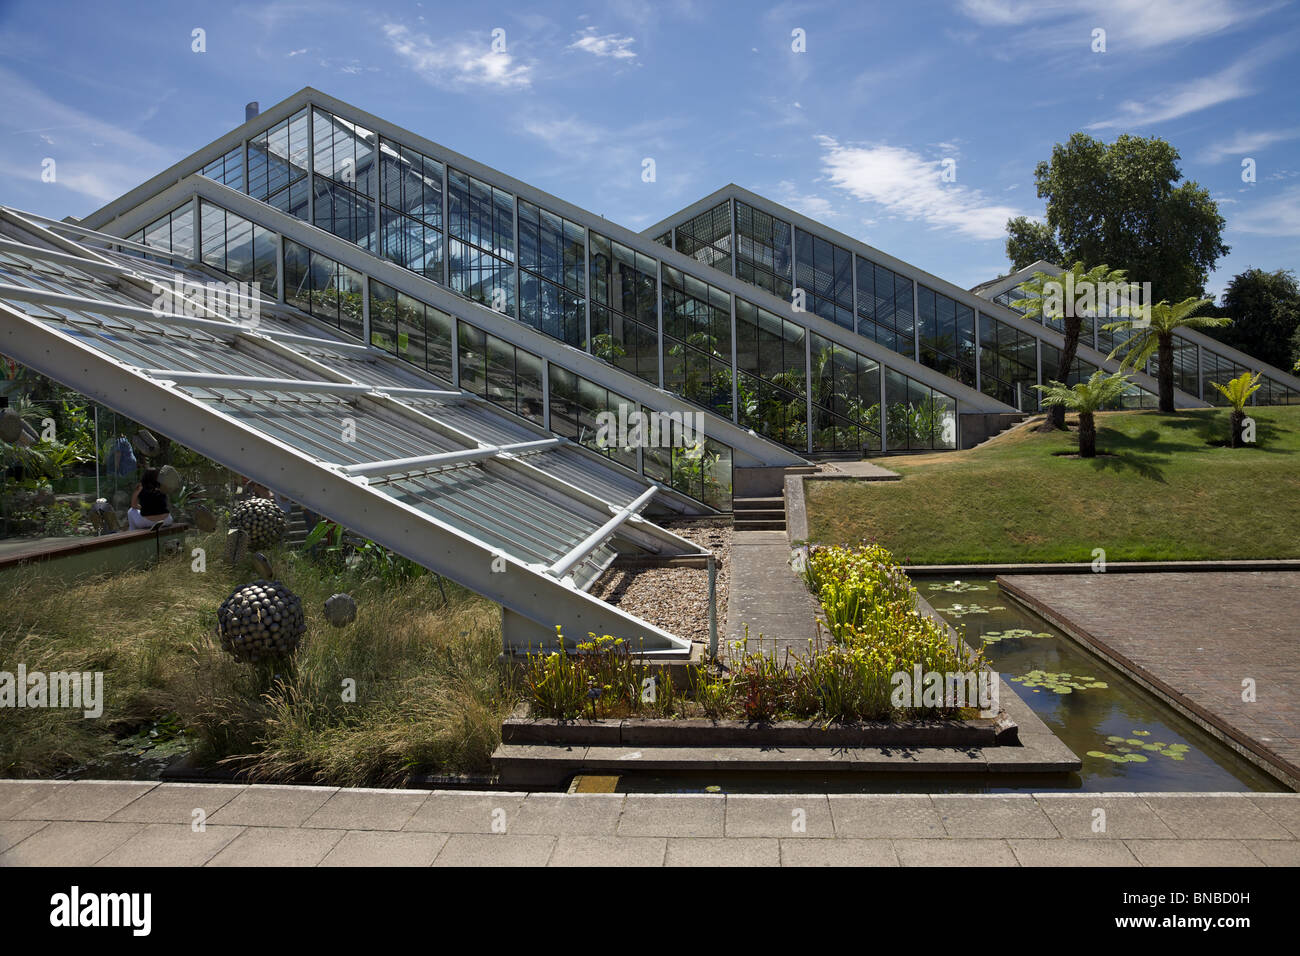 The Princess of Wales conservatory at Kew gardens London Stock Photo